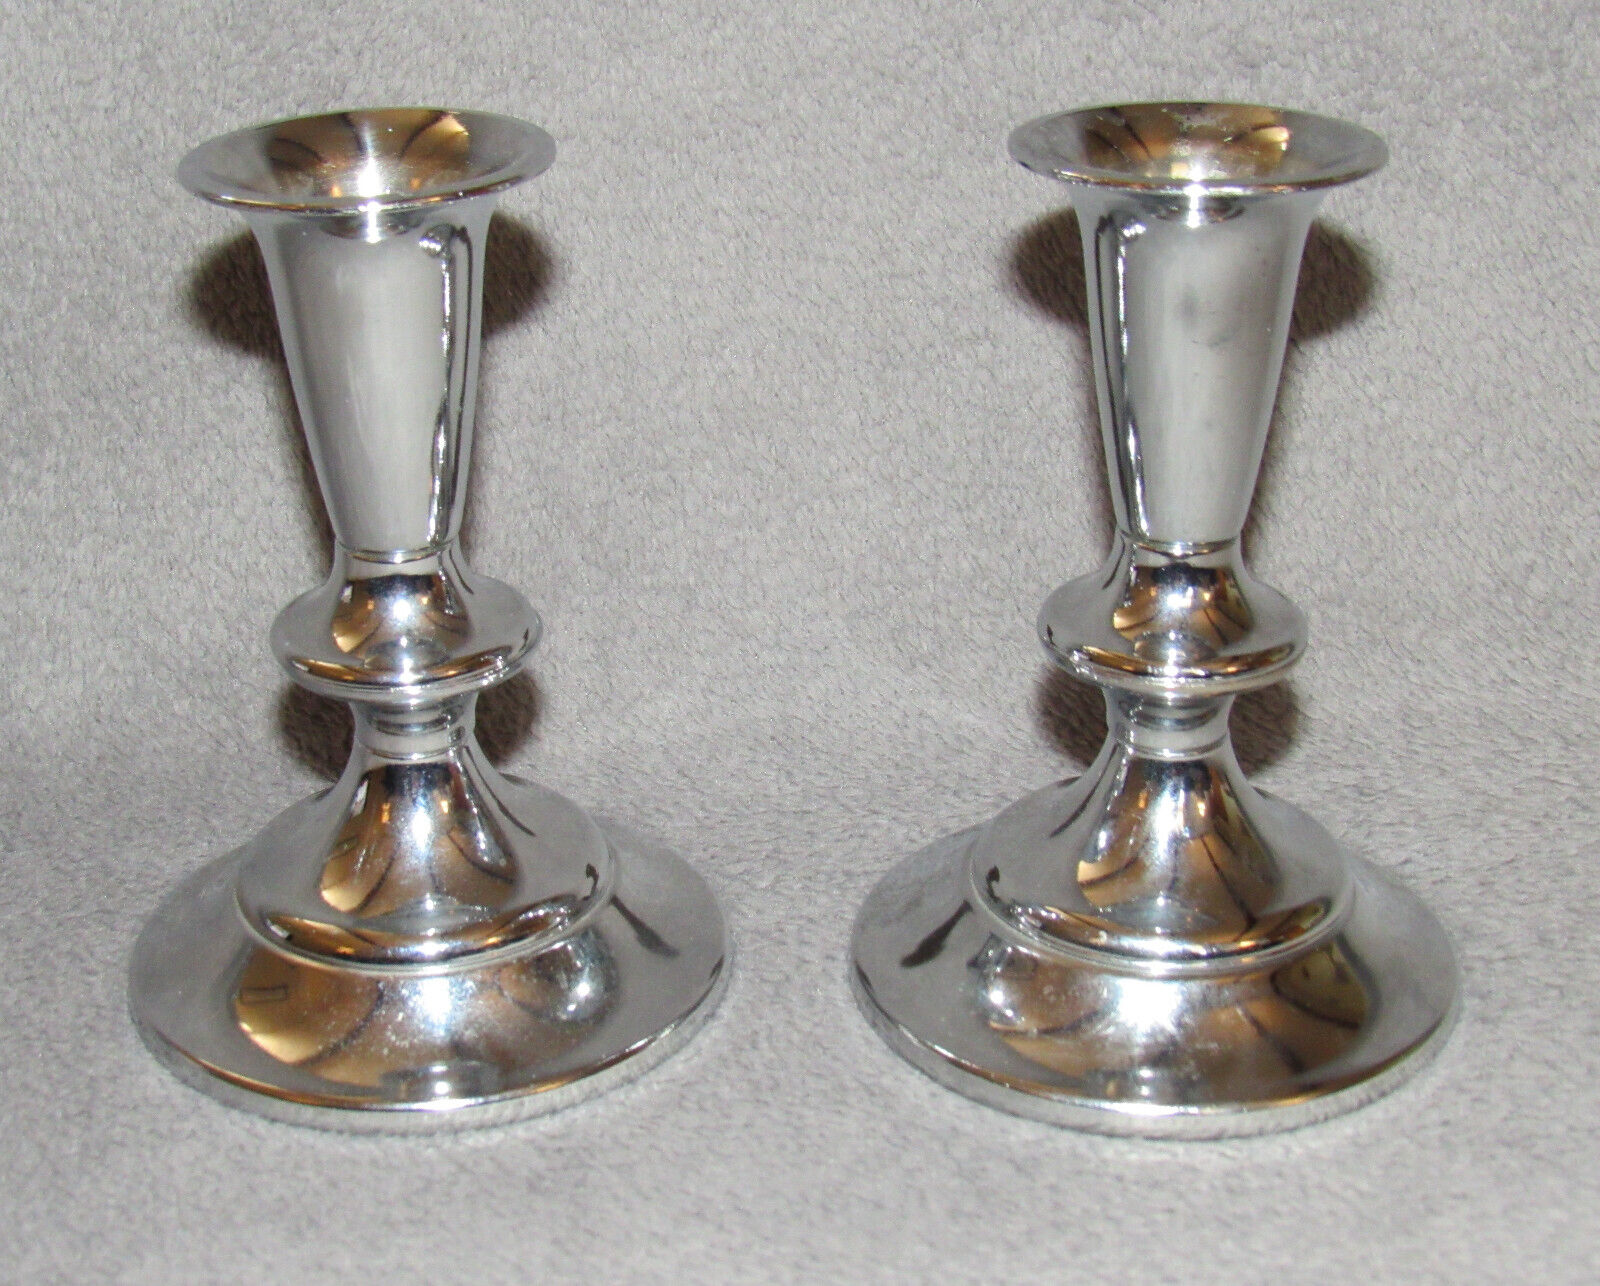 Pair of Vintage KROMEX Silver Tone Metal Candlesticks / Candle Holders - USA